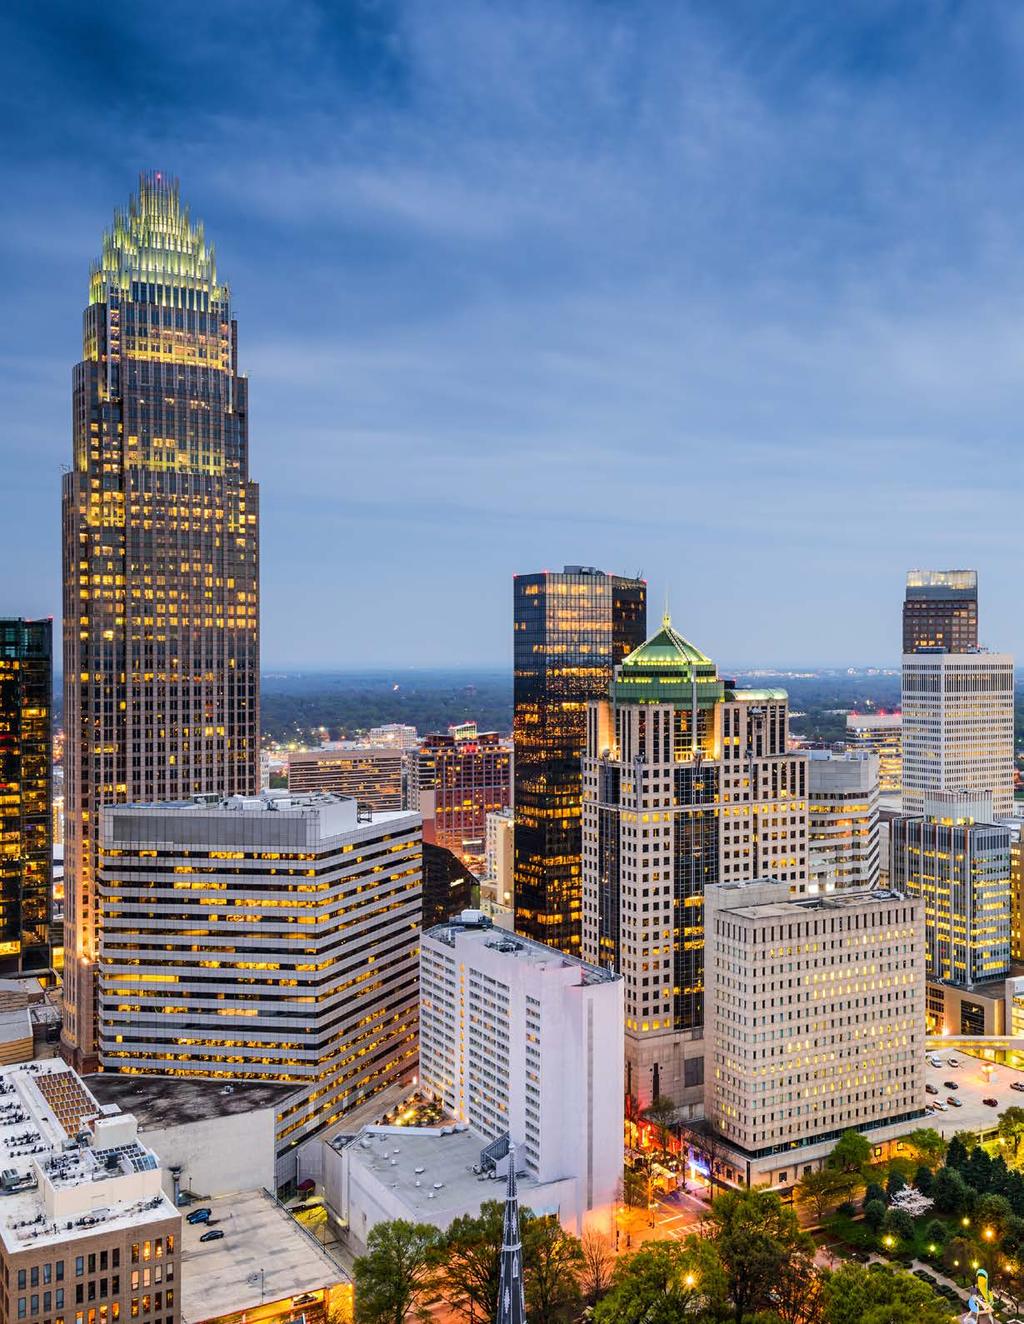 GROWTH IN CHARLOTTE Charlotte is the 17th largest U.S. city with a population of 809,958, making it the largest city in North Carolina. Of the major metro centers in the Southeast, Charlotte has 7.